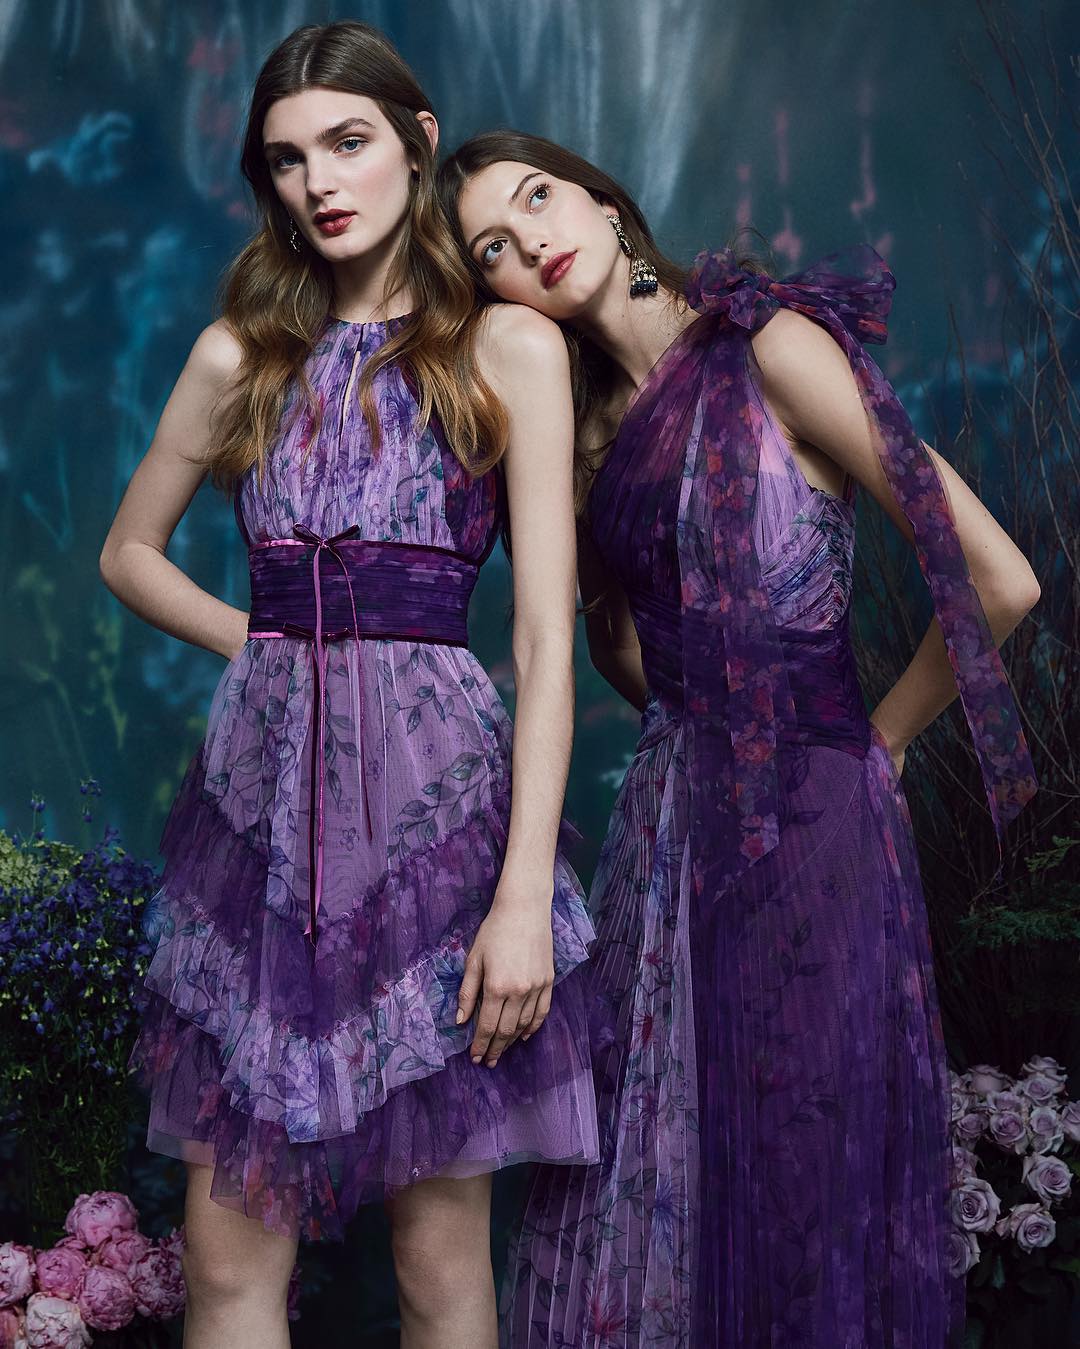 A look into the new Pre-Fall 2019 Marchesa Notte collection